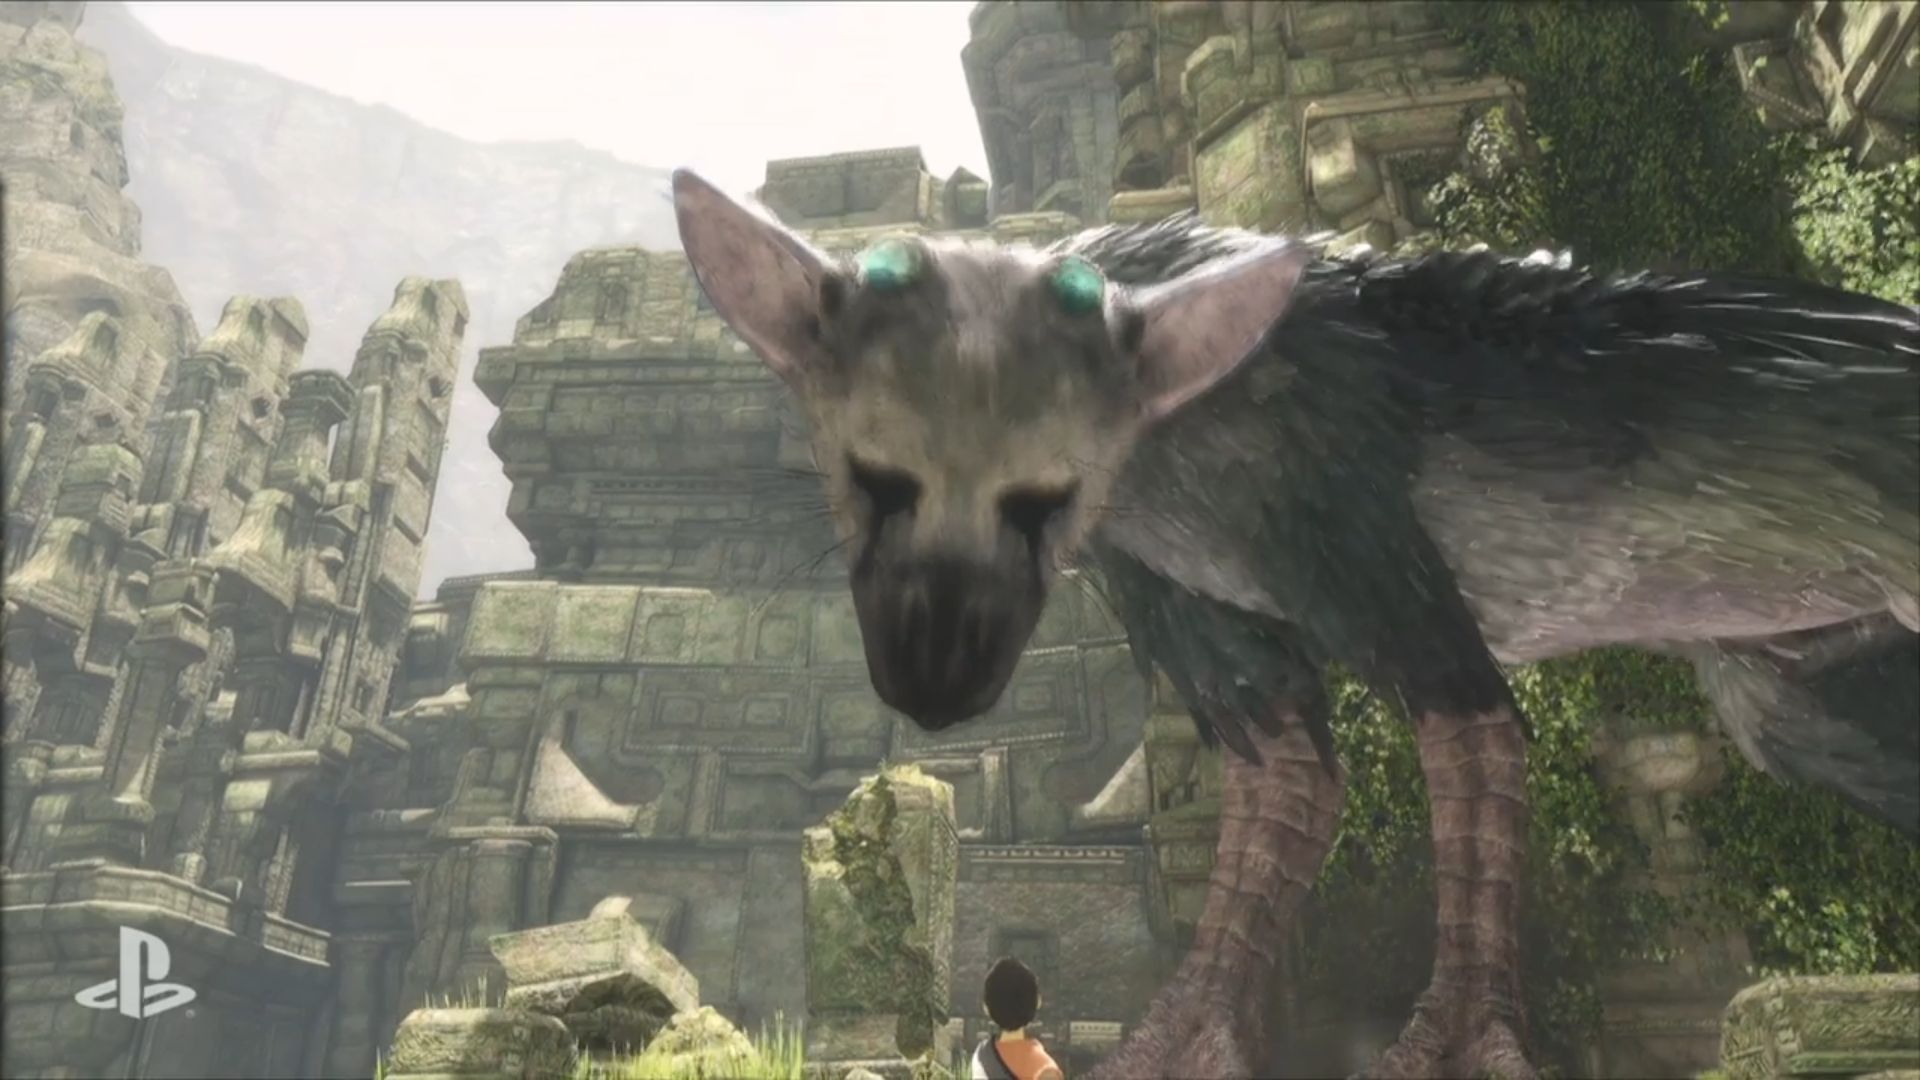 E3 2015: The Last Guardian is coming to PS4